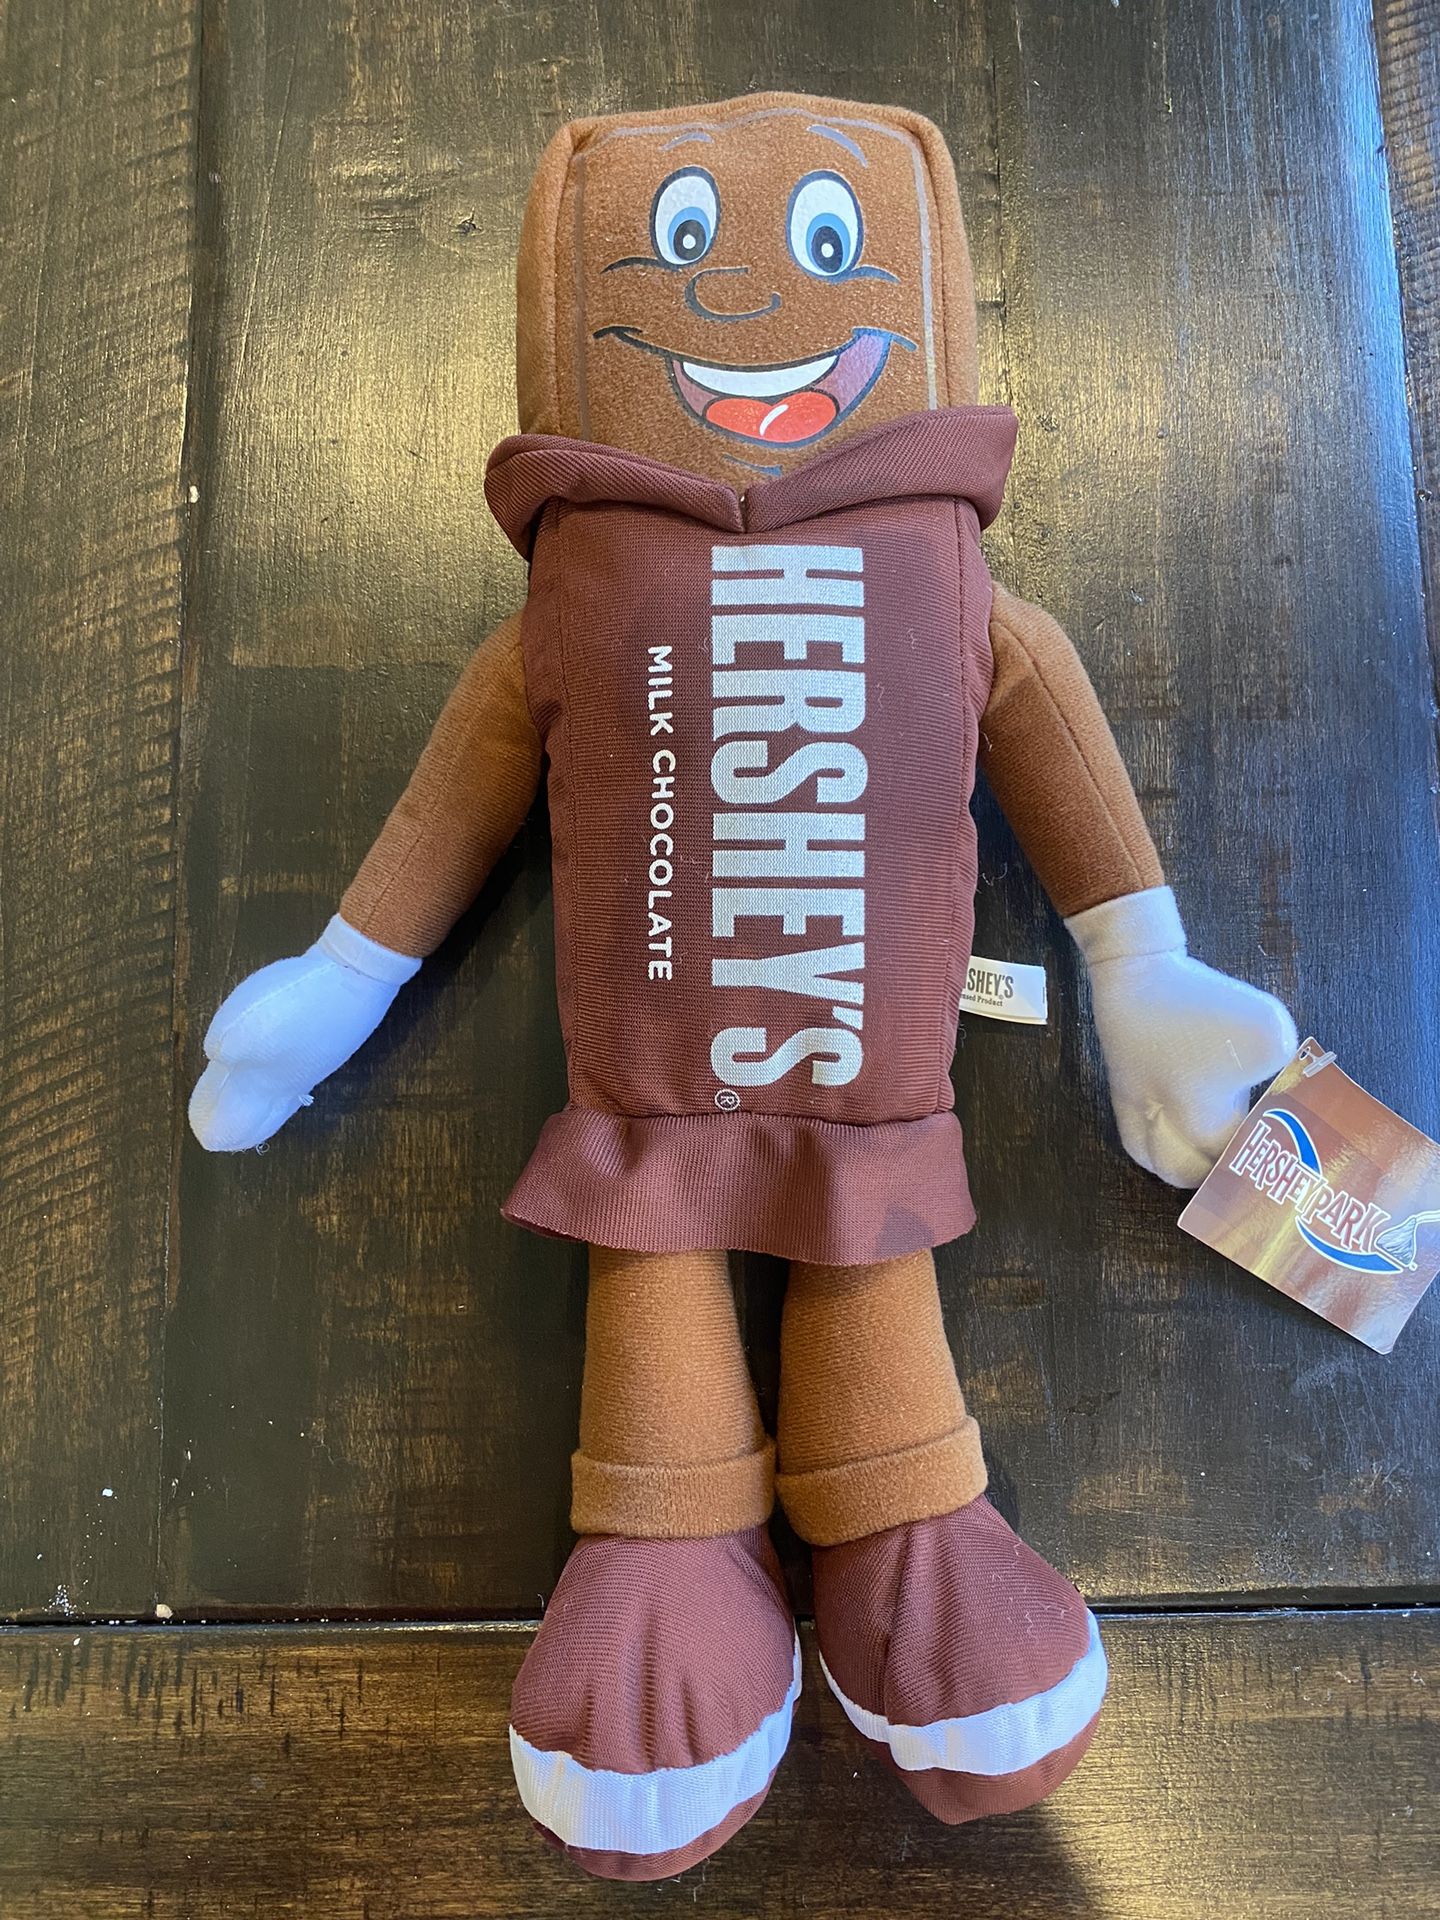 Hershey’s Bar Stuffed Toy - New Tag On 